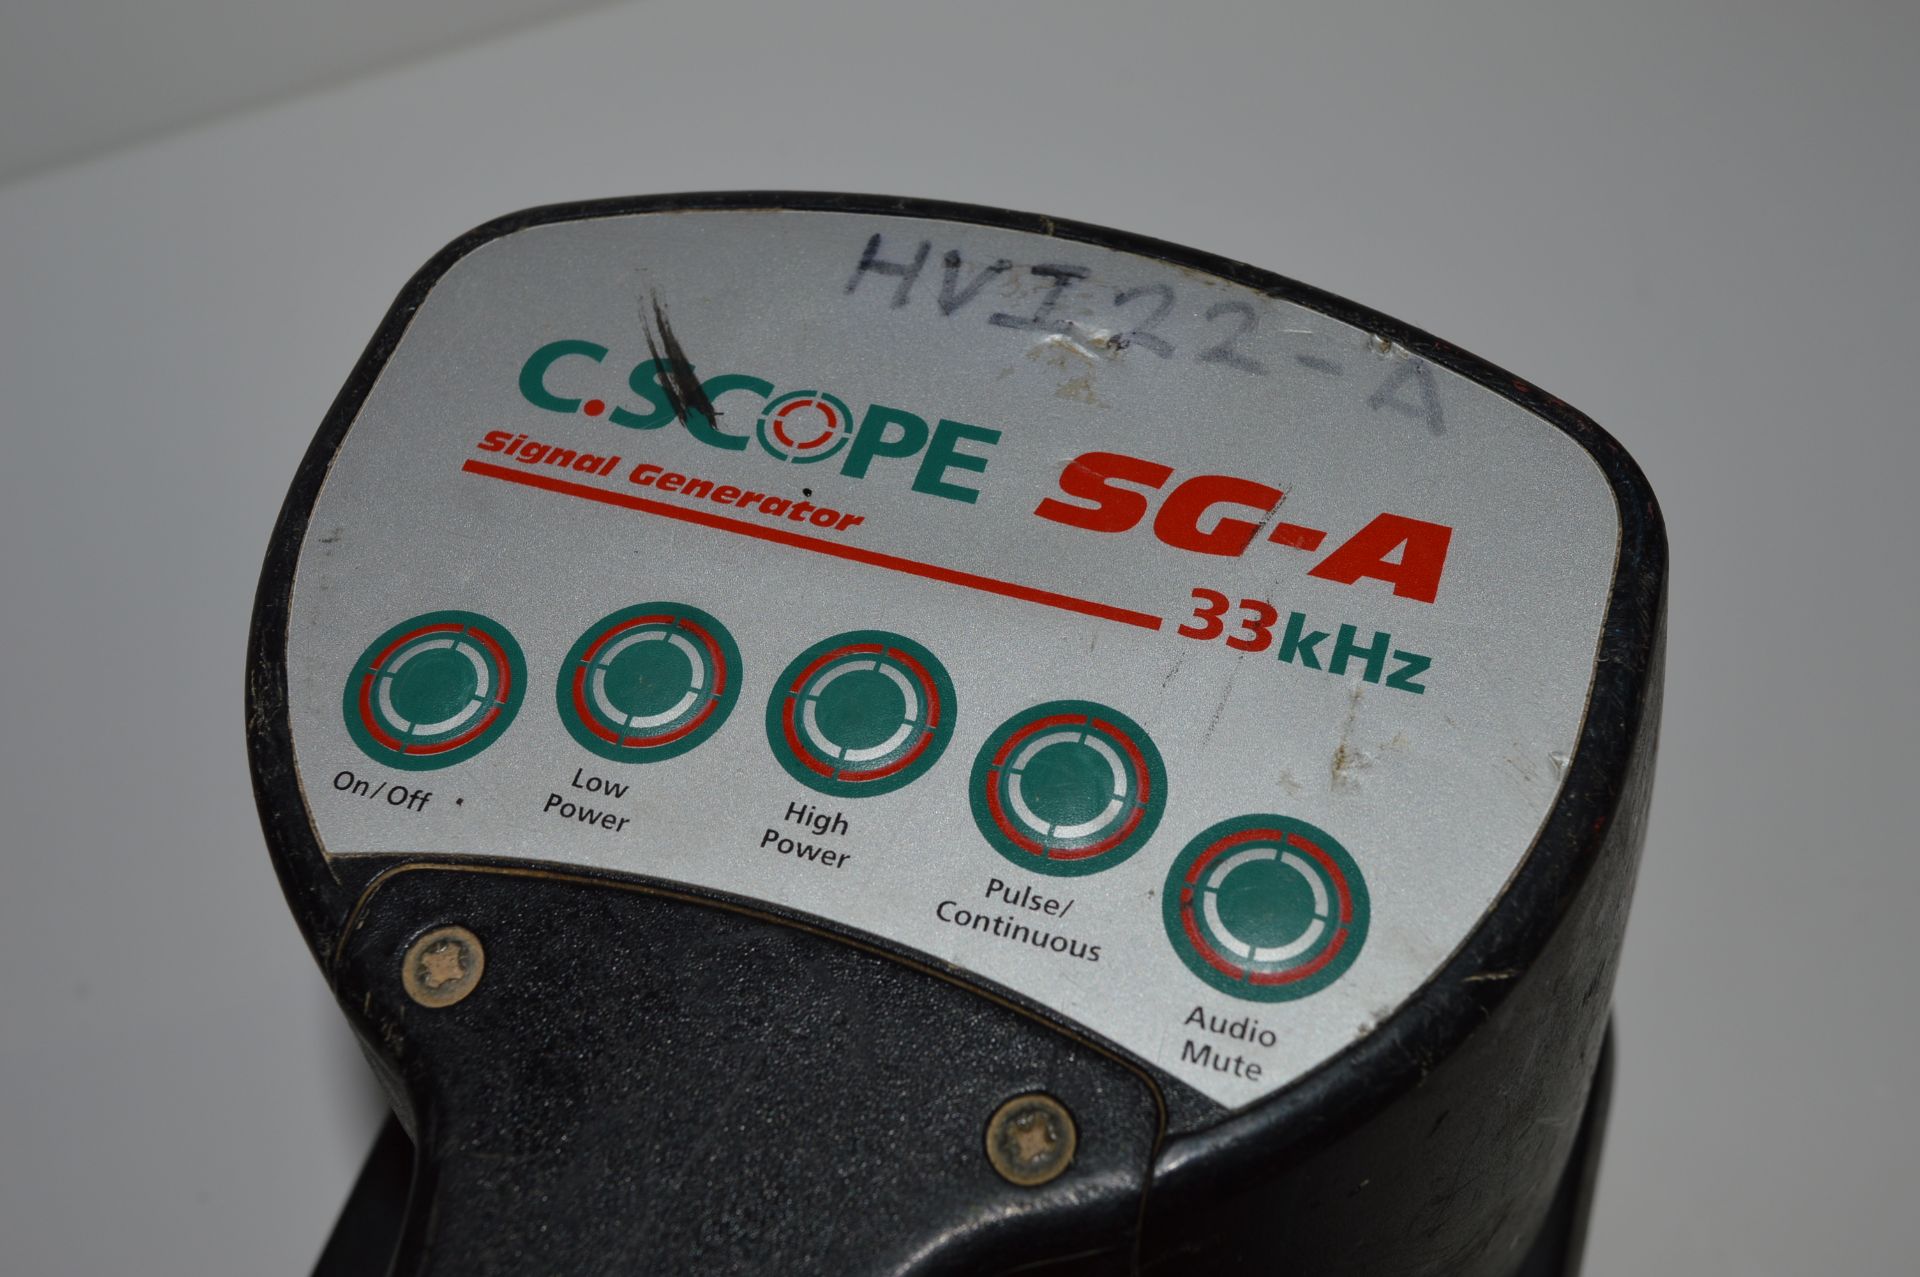 1 x C.Scope SGA Signal Generator - Suitable For CAT Cable Avoidance Tool - CL007 - Ref JP709 - - Image 5 of 7